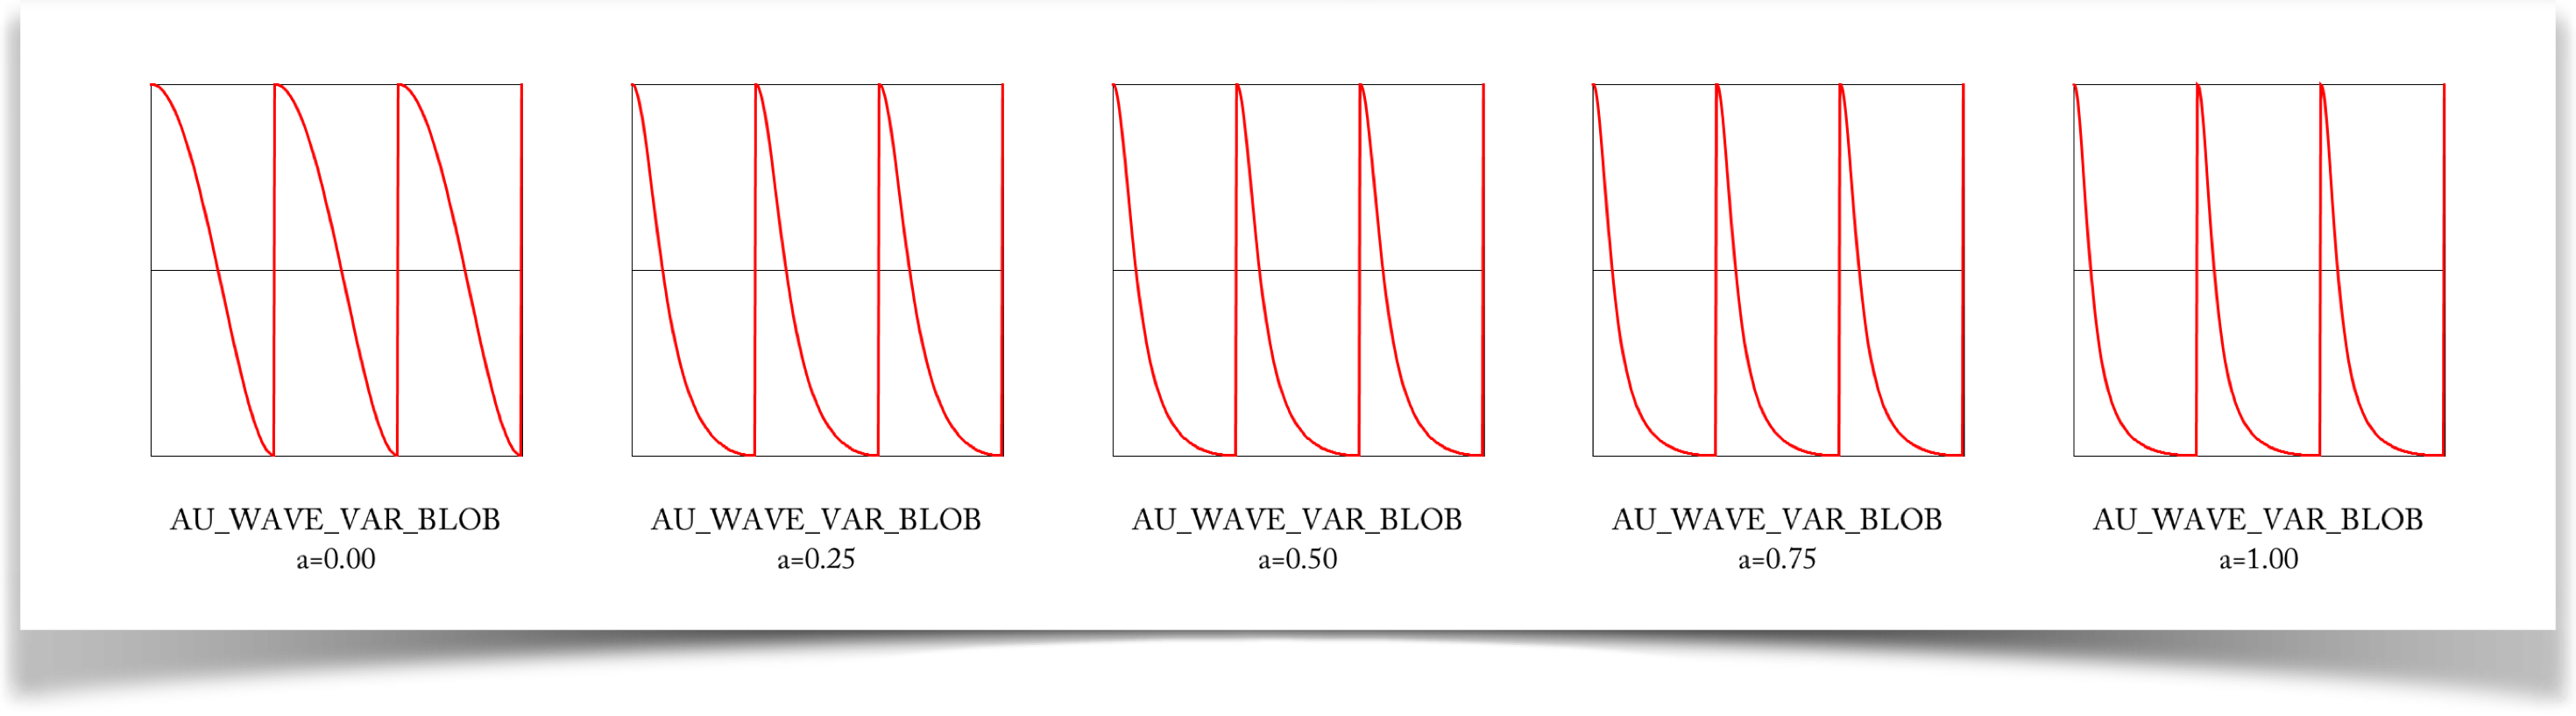 The variable blob wave